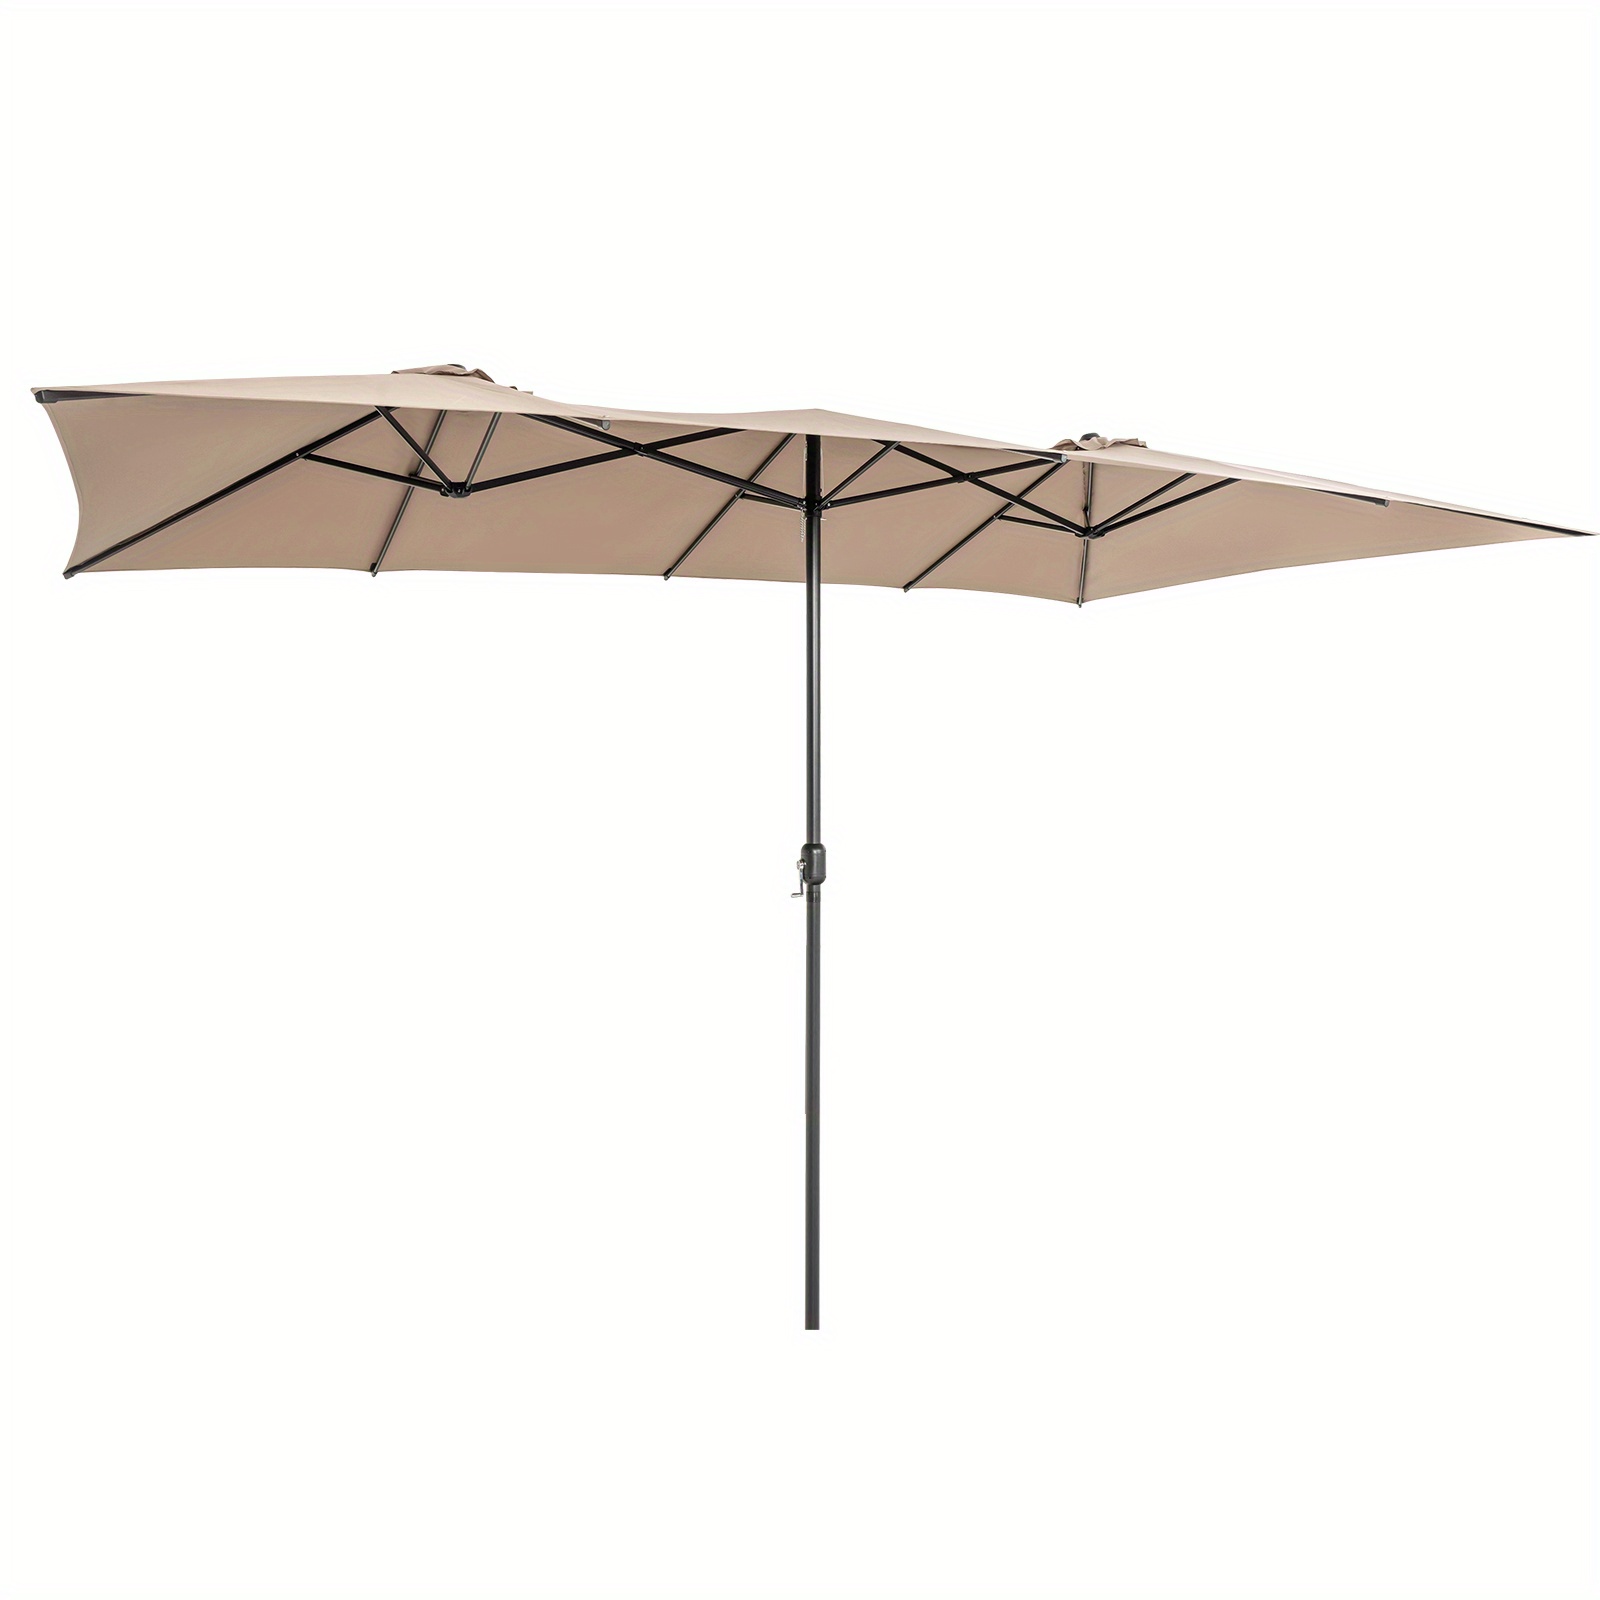 

Lifezeal 15ft Double-sided Patio Market Umbrella Large Crank Handle Vented Outdoor Twin